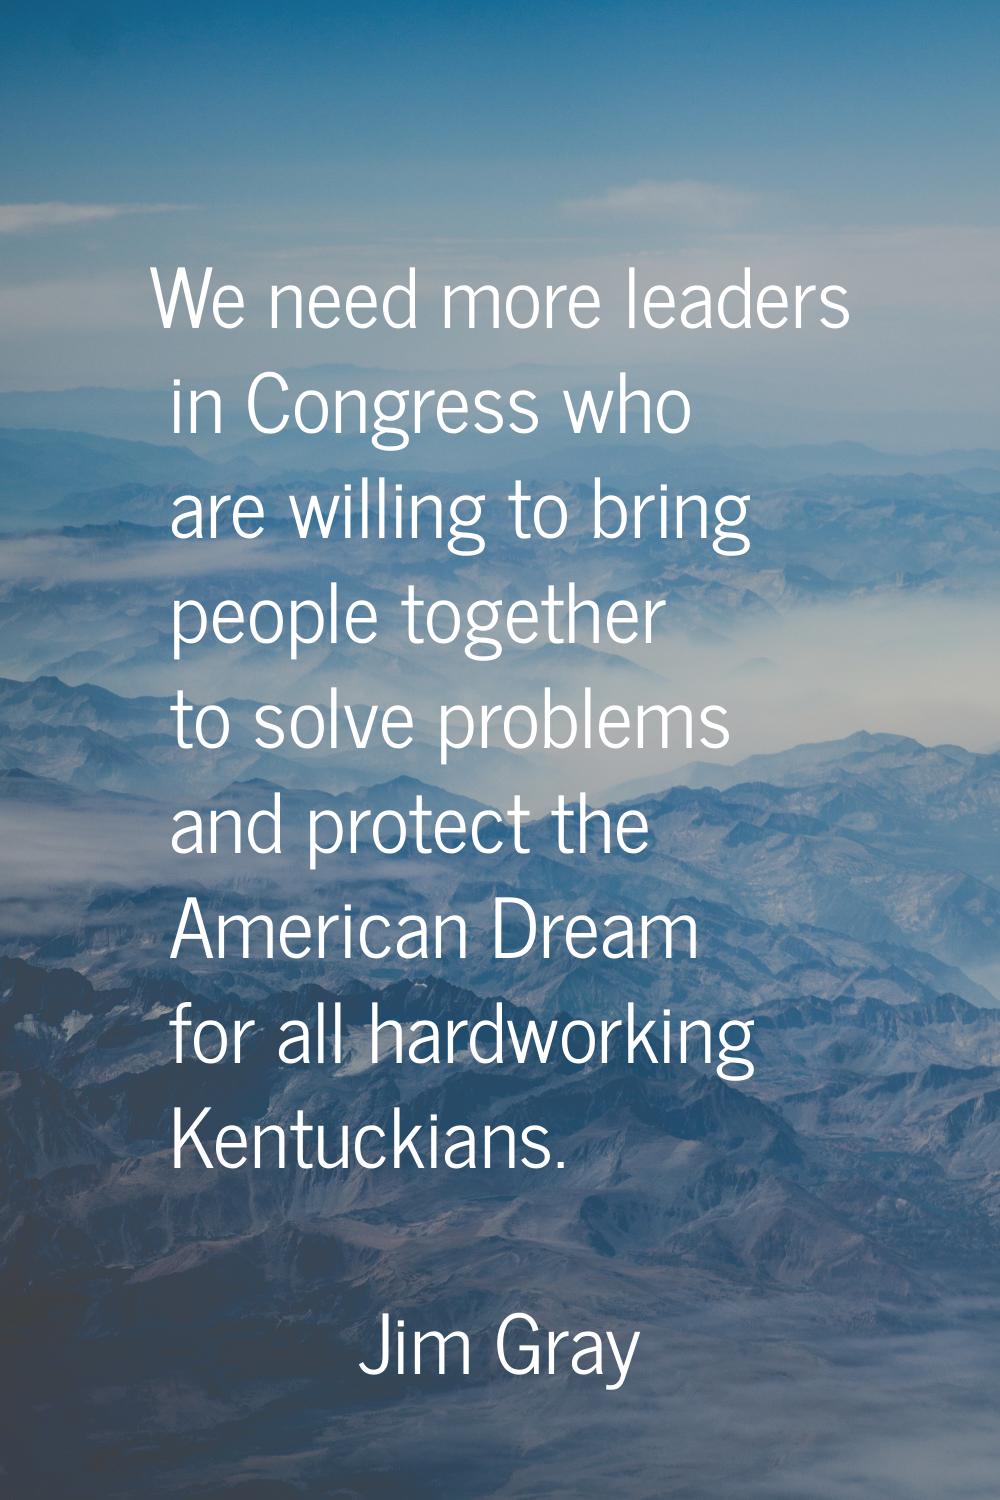 We need more leaders in Congress who are willing to bring people together to solve problems and pro